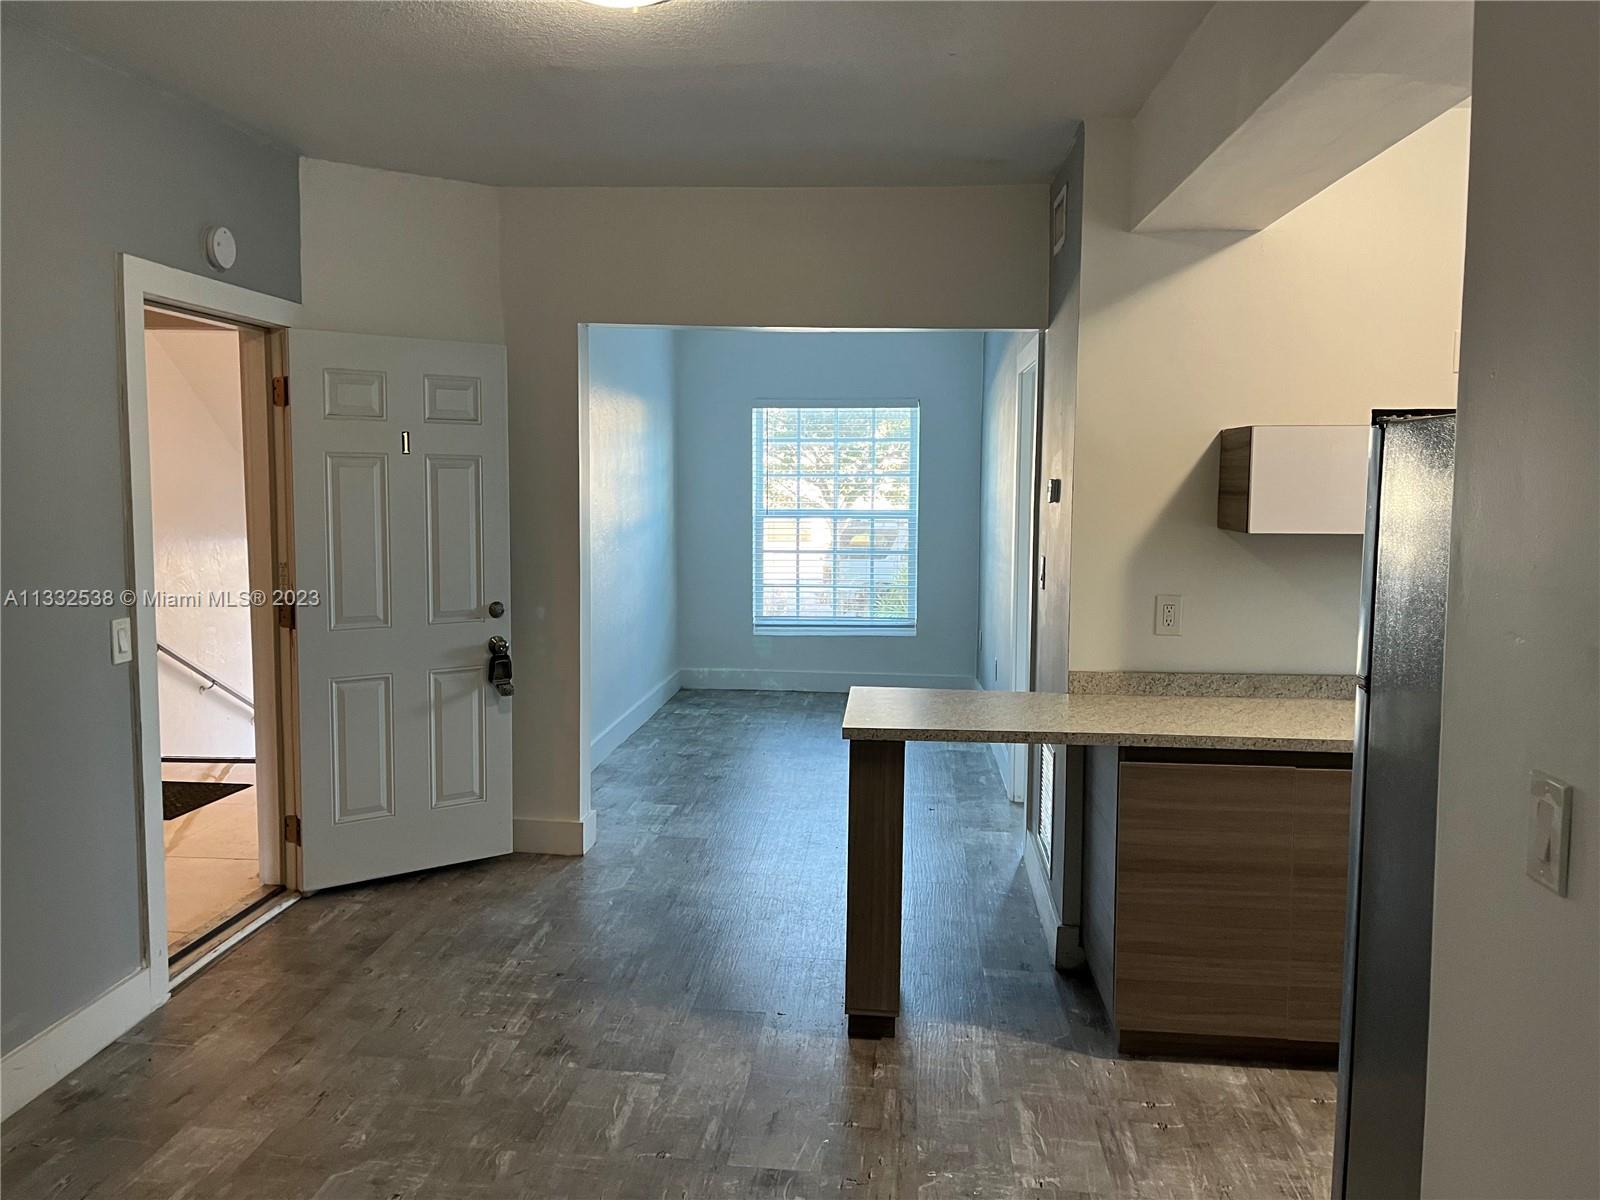 This professionally maintained building is located in a desirable neighborhood.  Enjoy the location and the quality building maintenance.  Spacious layout with plenty of room for a dining room, living room, and two bedrooms located on opposite sides of the apartment.